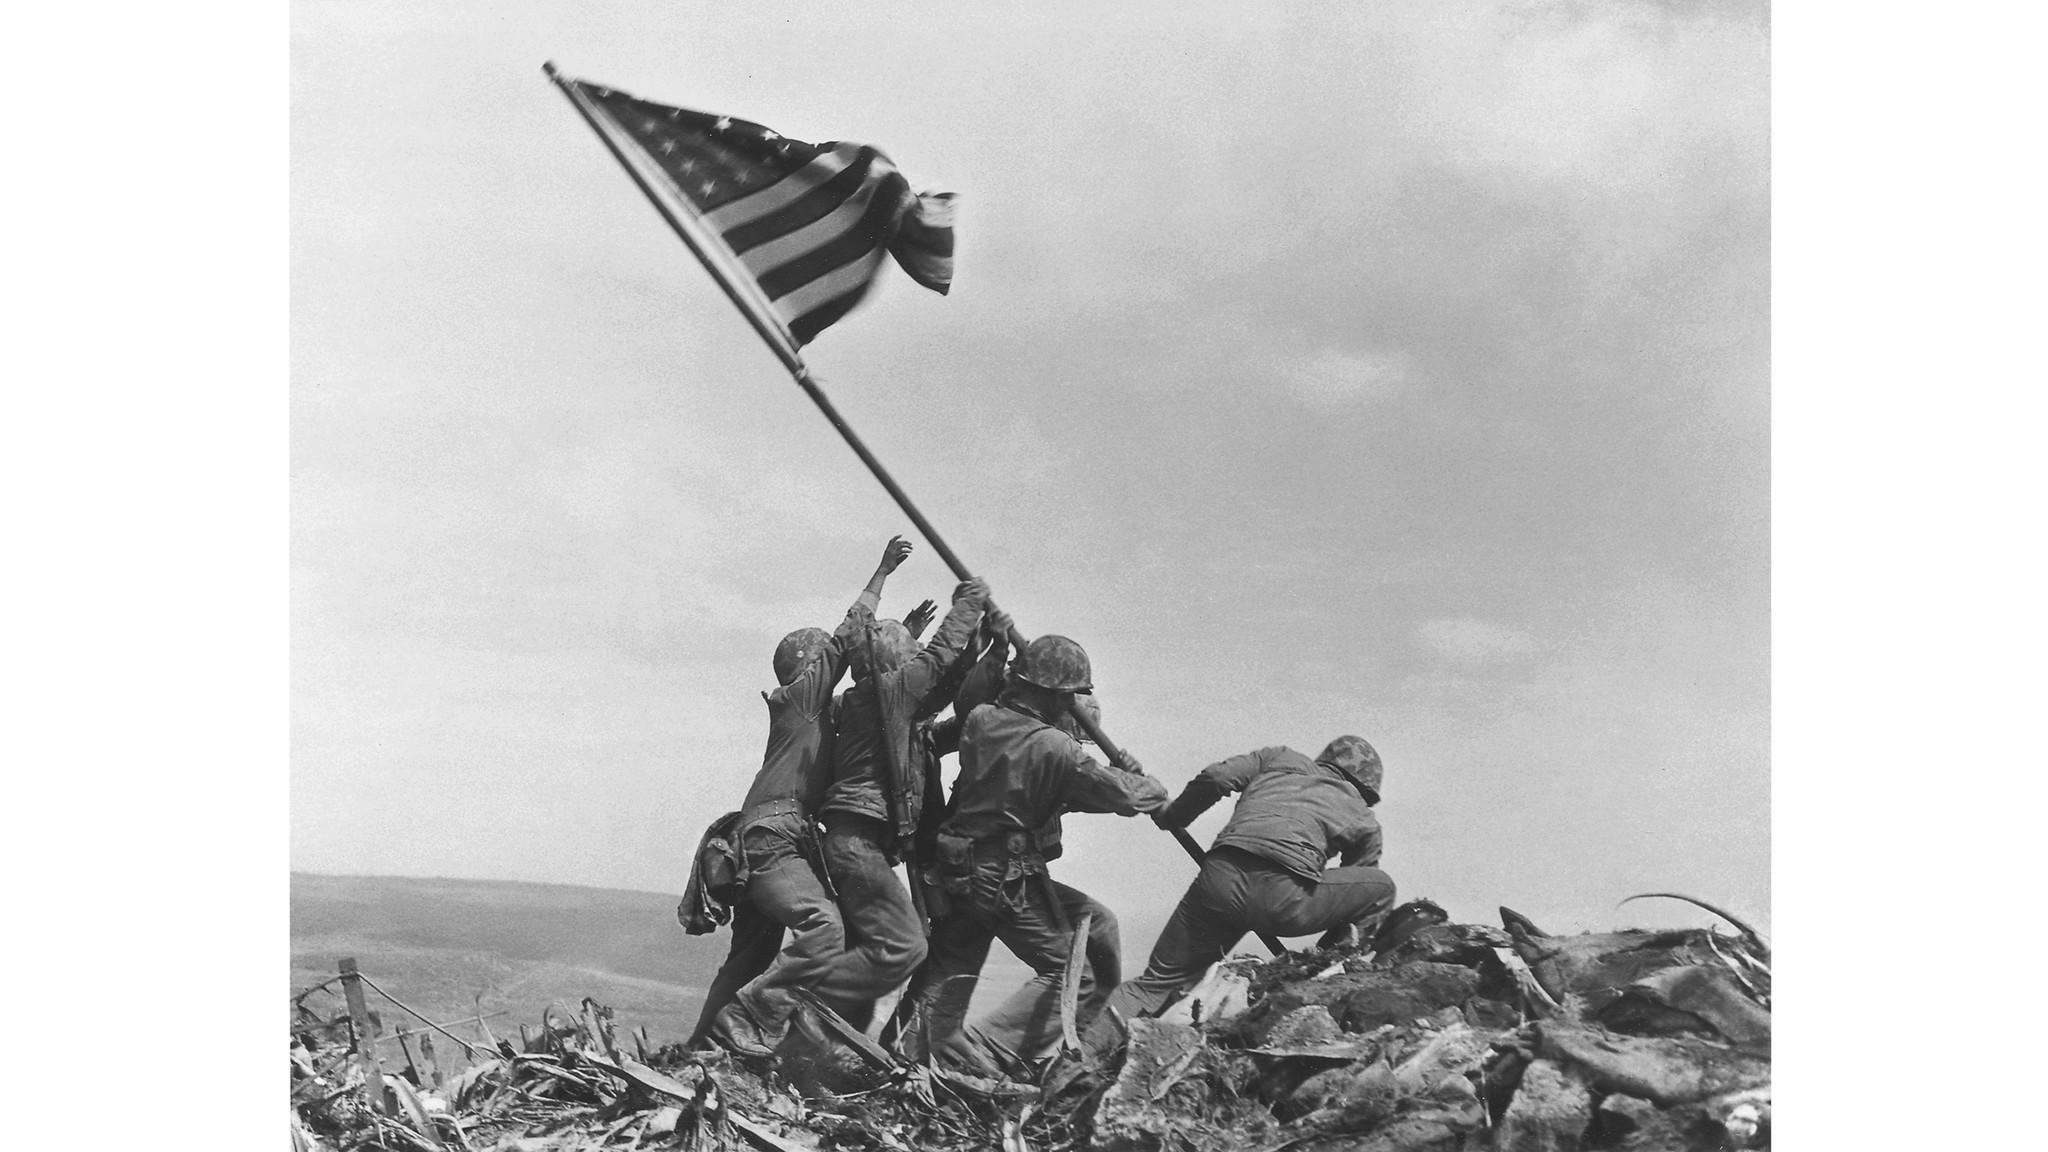 2048x1152 Download Wallpapers, Download grayscale monochrome 1600Ã1200 ... Marine in  iconic Iwo Jima flag photo was misidentified - LA Times undefined Raising  ...